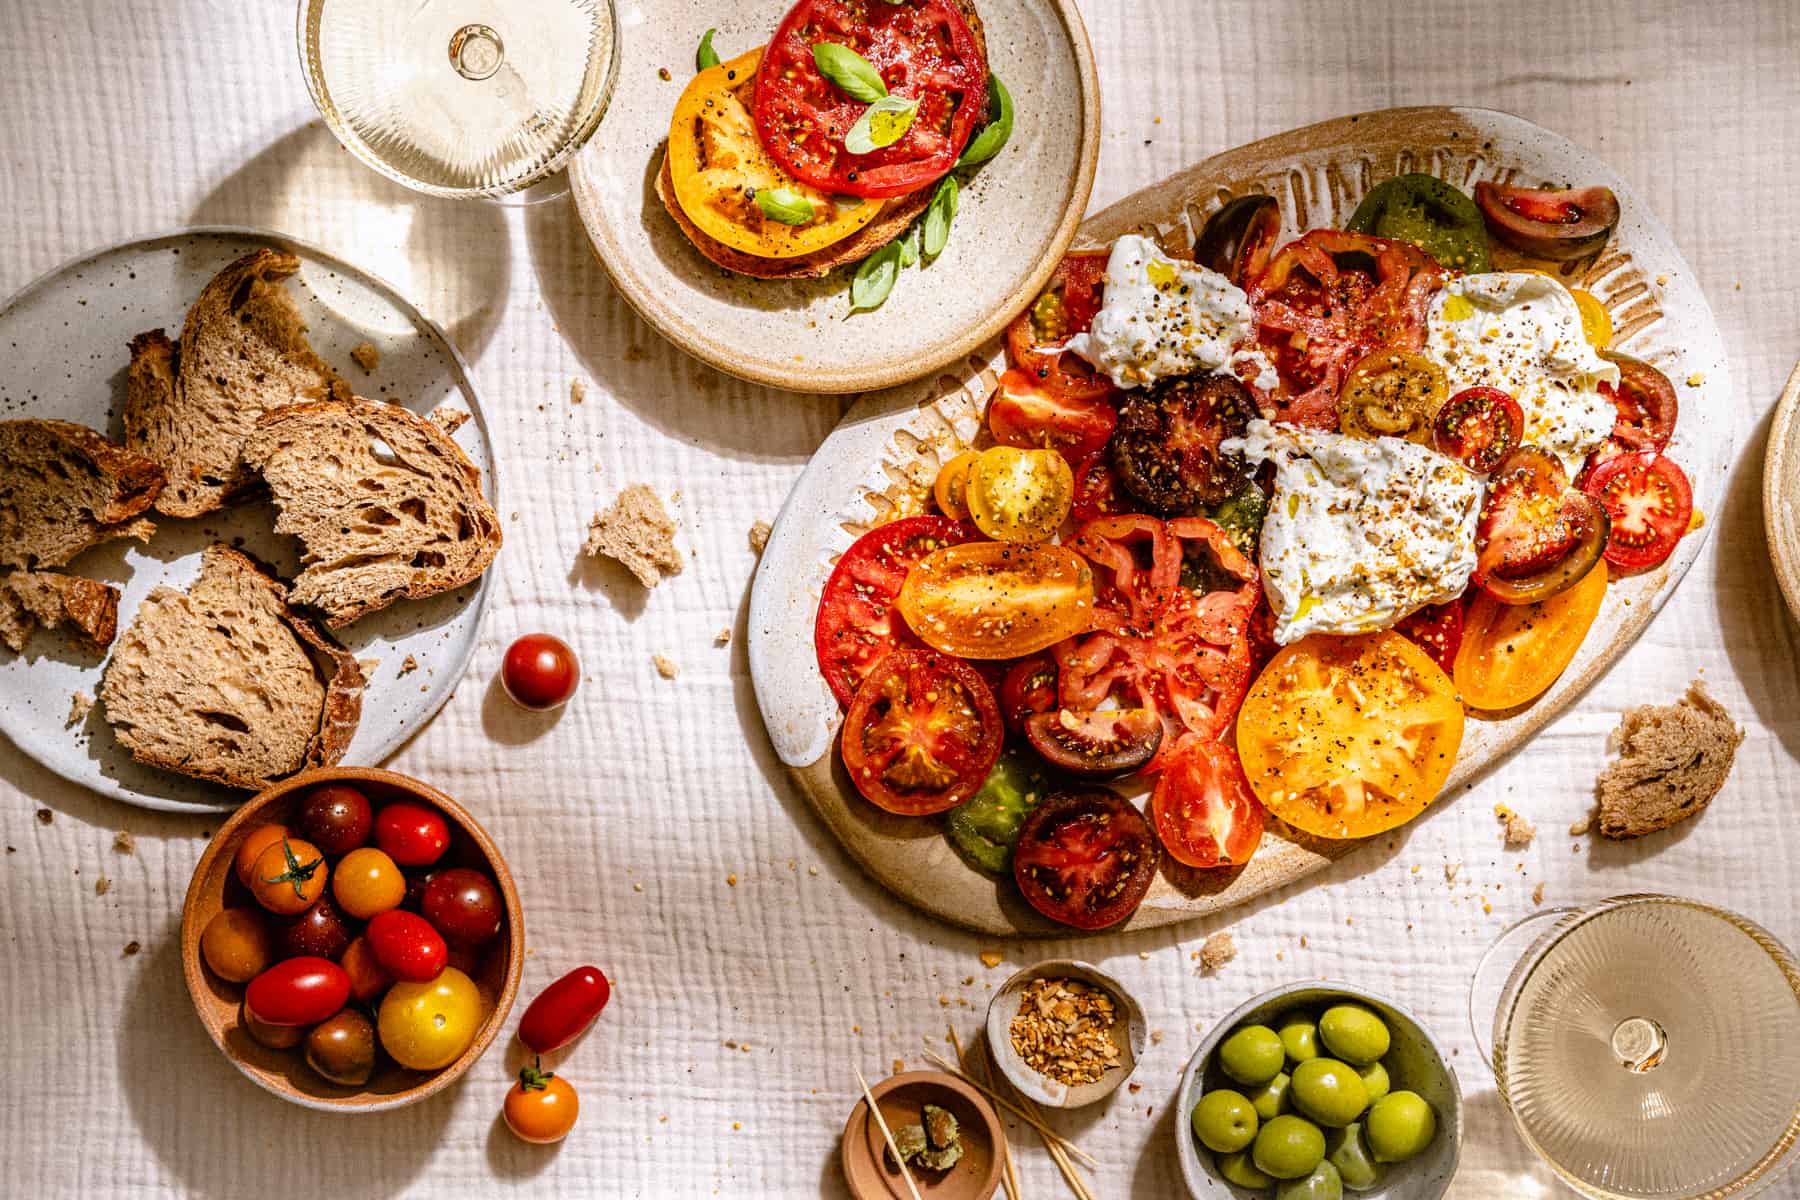 A table with platters of tomatoes, bread, burrata and olives with glasses of wine.